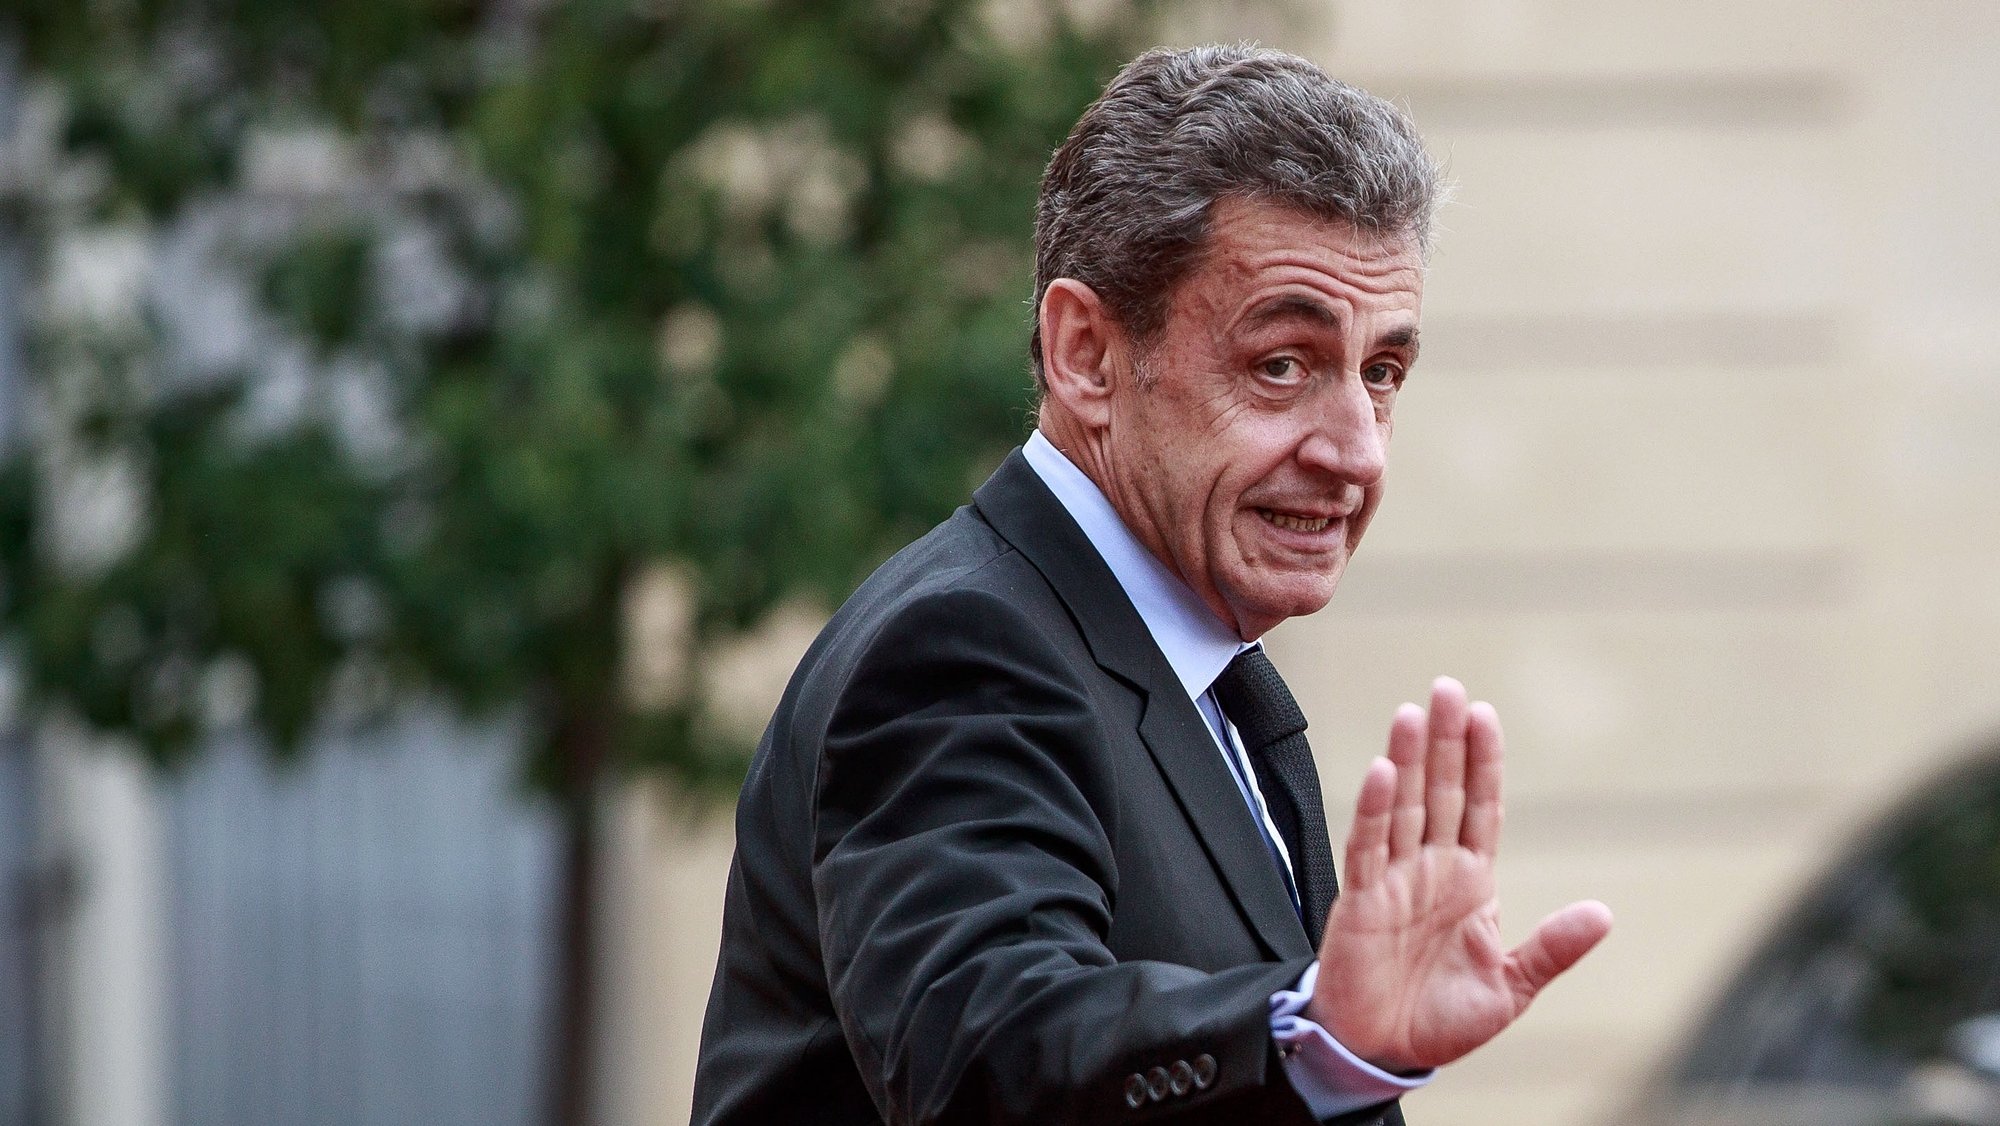 epa09496927 (FILE) - Former French president Nicolas Sarkozy leaves the Elysee palace after a lunch for the visiting leaders and heads of state, following a memorial for French former President Jacques Chirac, in Paris, France, 30 September 2019 (reissued 30 September 2021). A Paris court announced on 30 September 2021, it has found France&#039;s former president Nicolas Sarkozy guilty of illegal campaign financing of his unsuccessful 2012 reelection bid. He was not present for the verdict&#039;s announcement at the court. The ruling came six months after Sarkozy was handed a one-year prison sentence for corruption in a separate trial.  EPA/CHRISTOPHE PETIT TESSON *** Local Caption *** 56731802